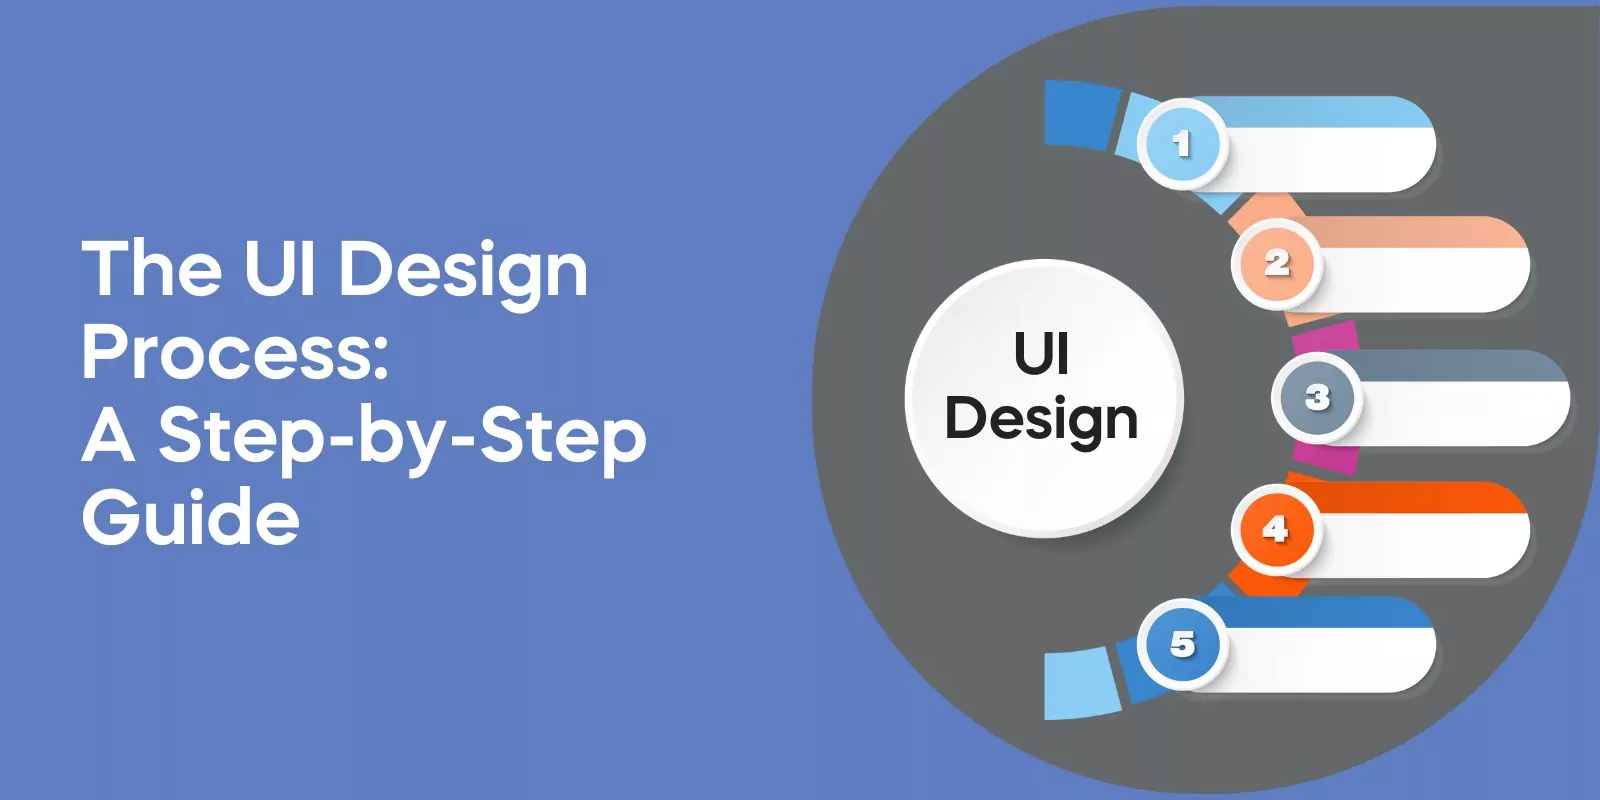 The UI Design Process: A Step-by-Step Guide